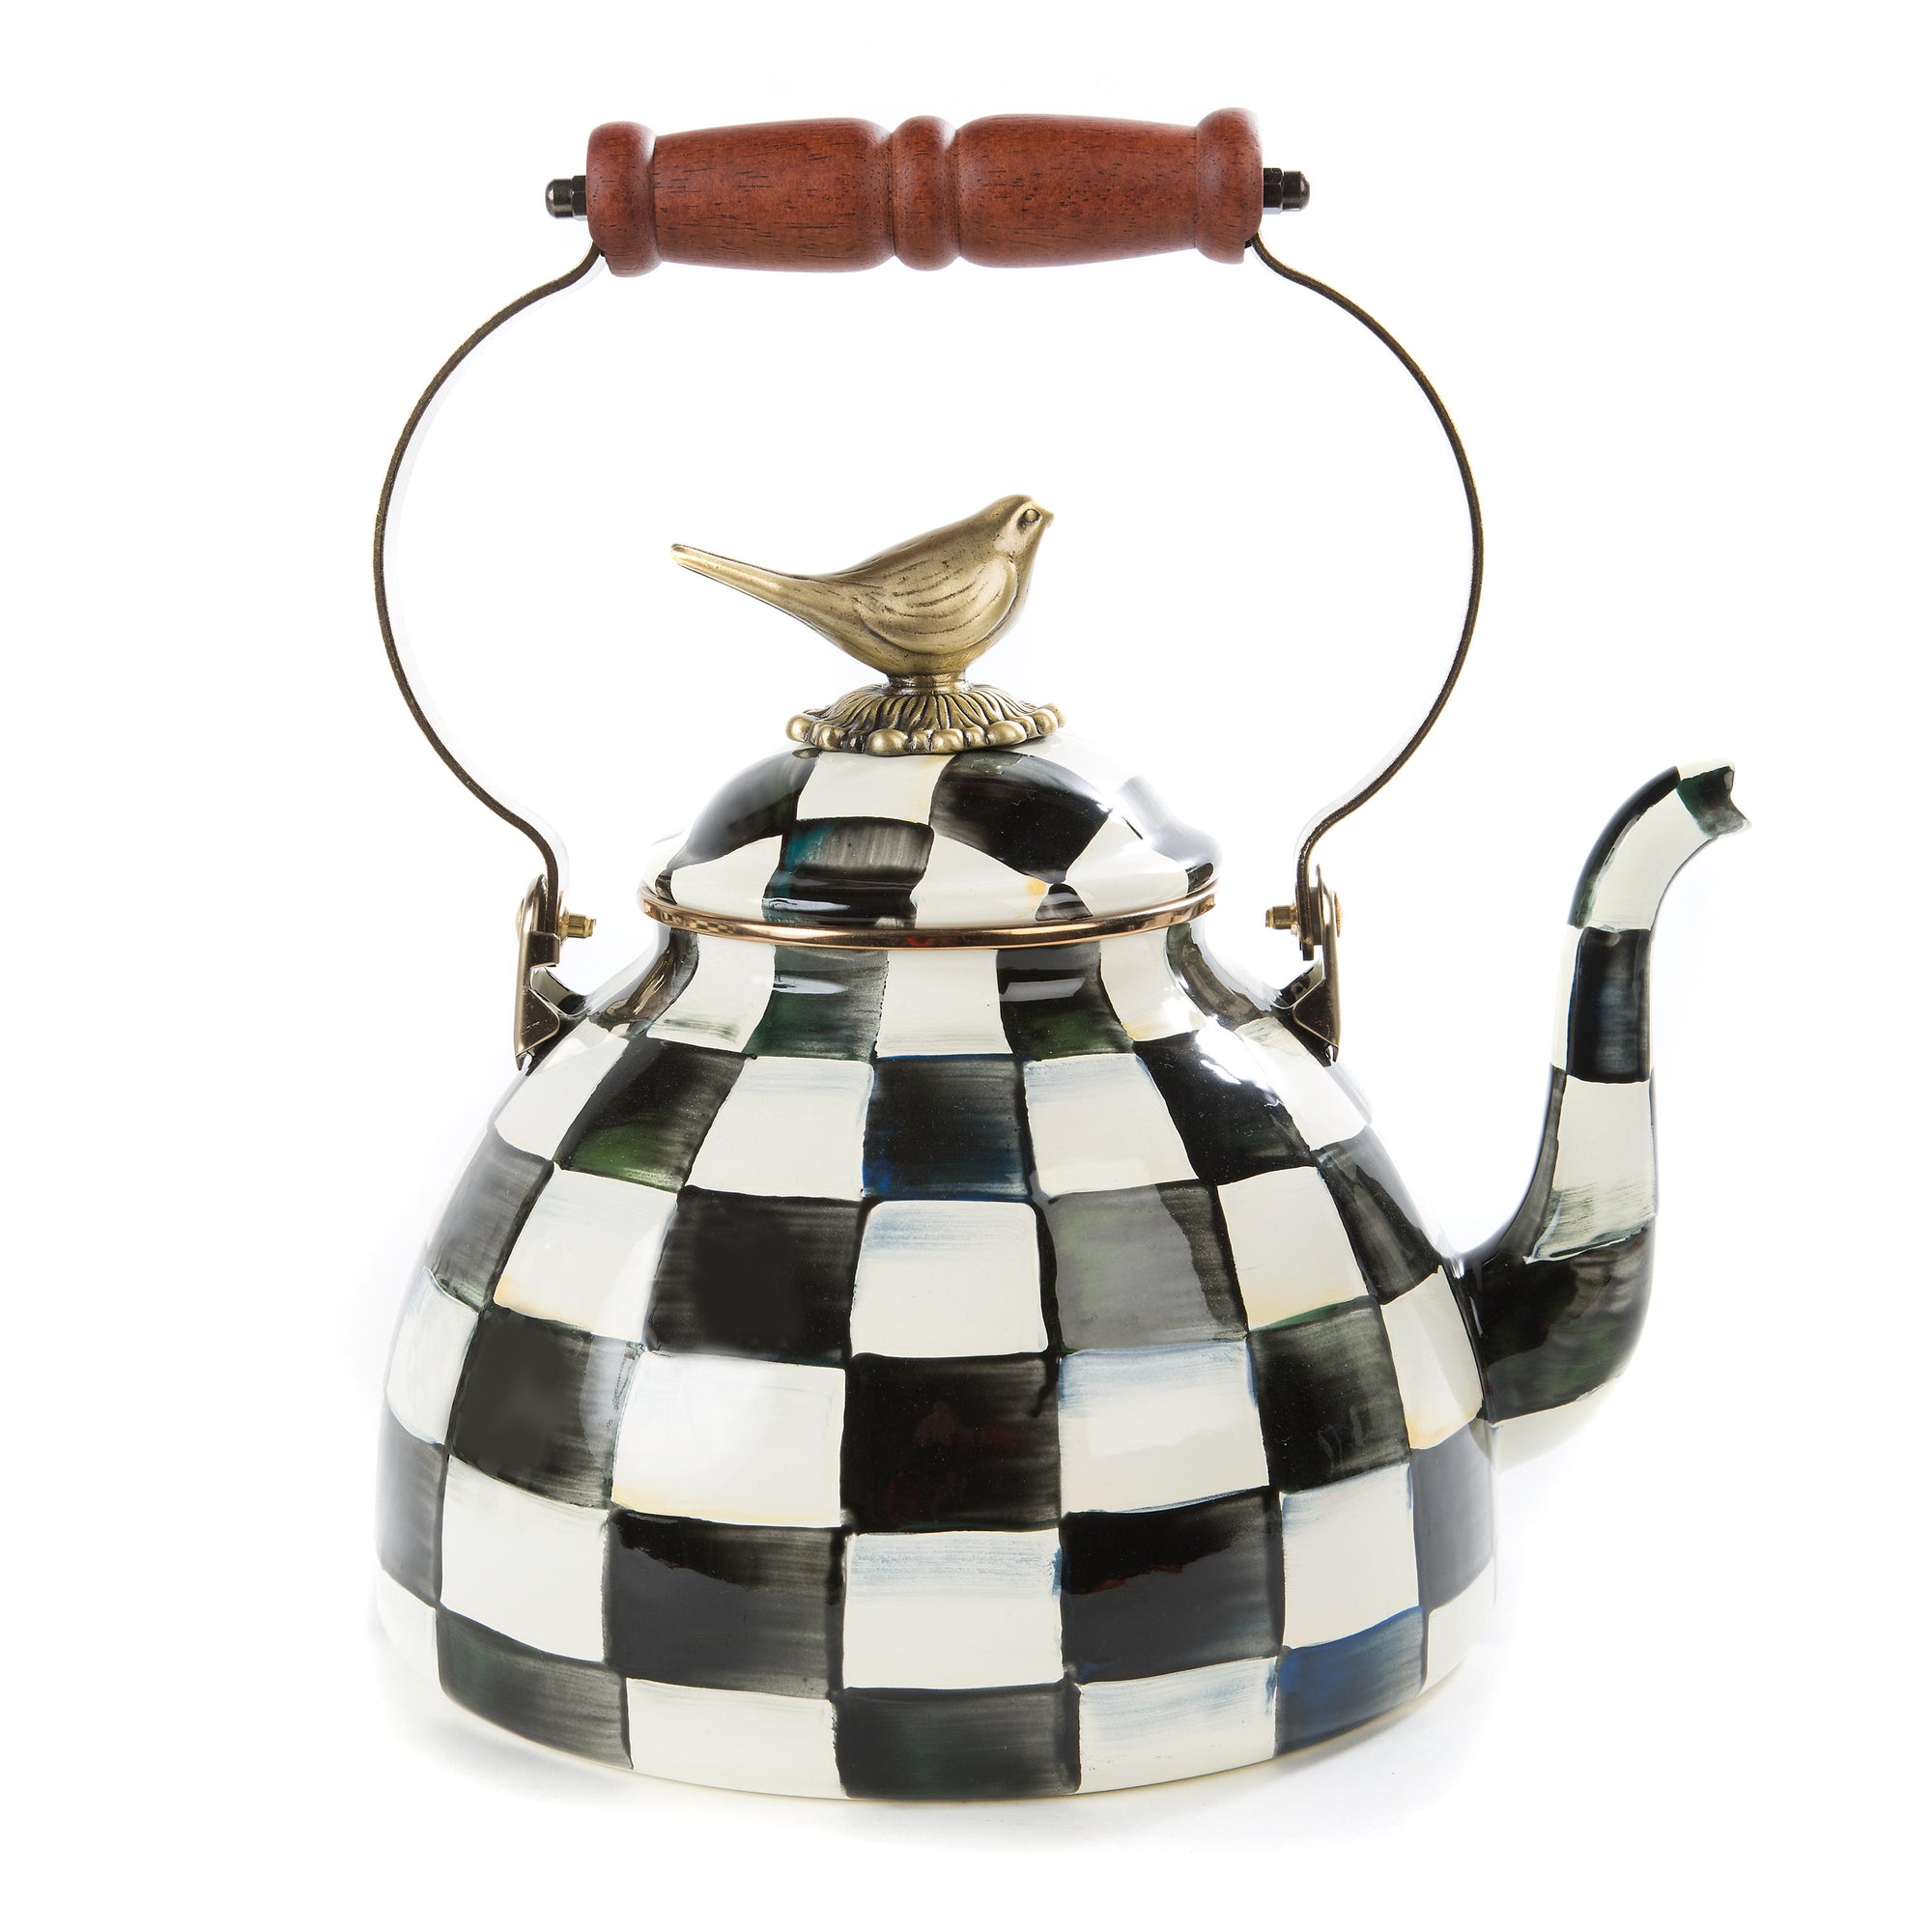 Courtly Check Enamel 3 Qt. Tea Kettle with Bird